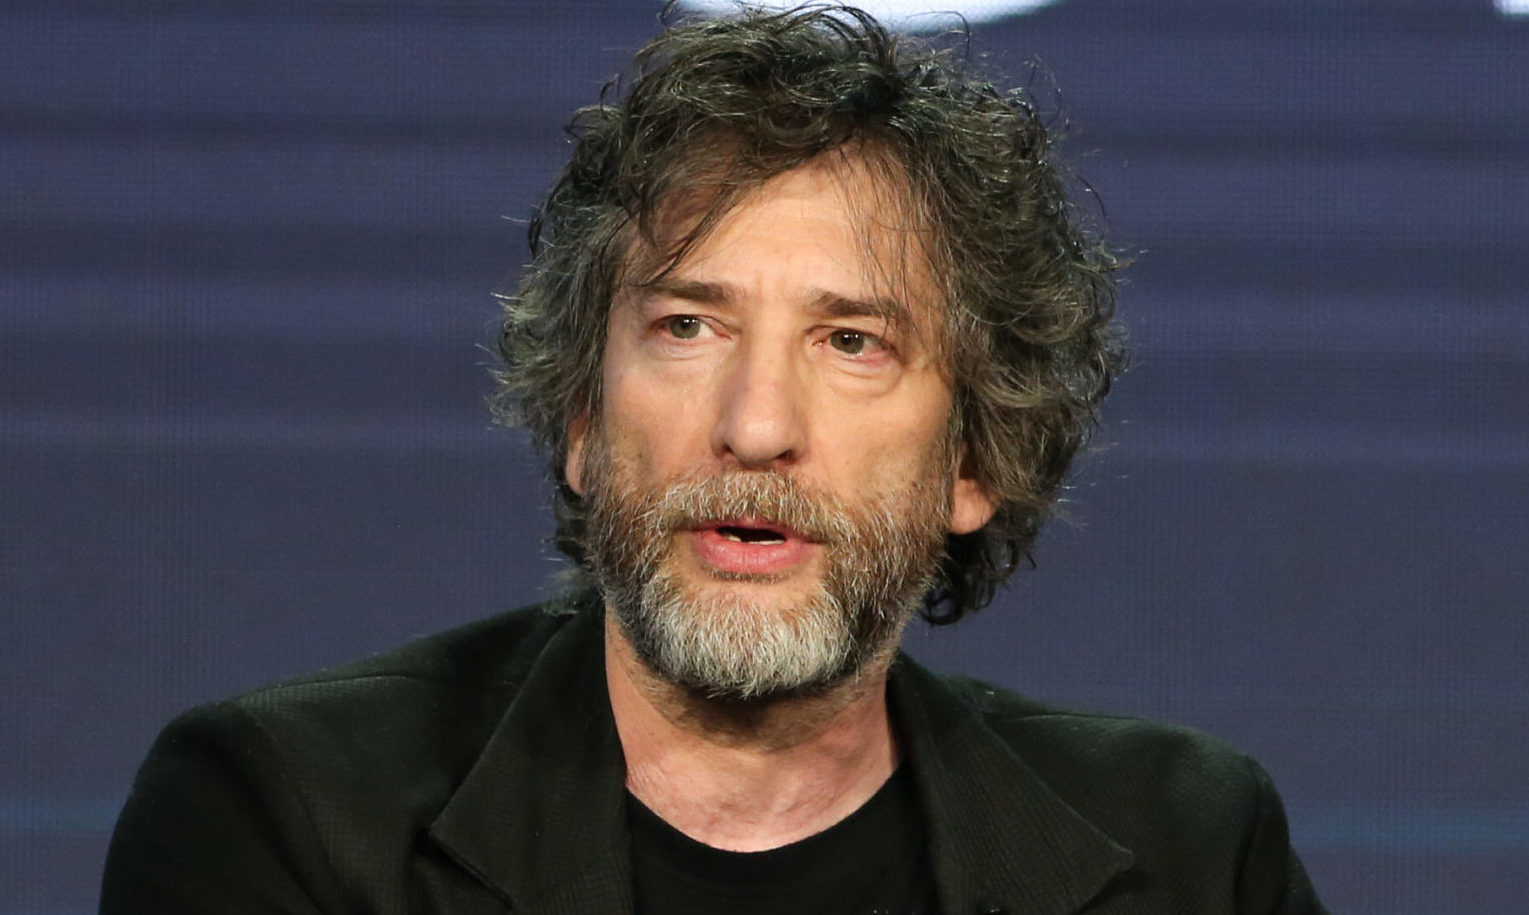 Neil Gaiman travelled to lockdown in Skye rather than with his wife in New Zealand